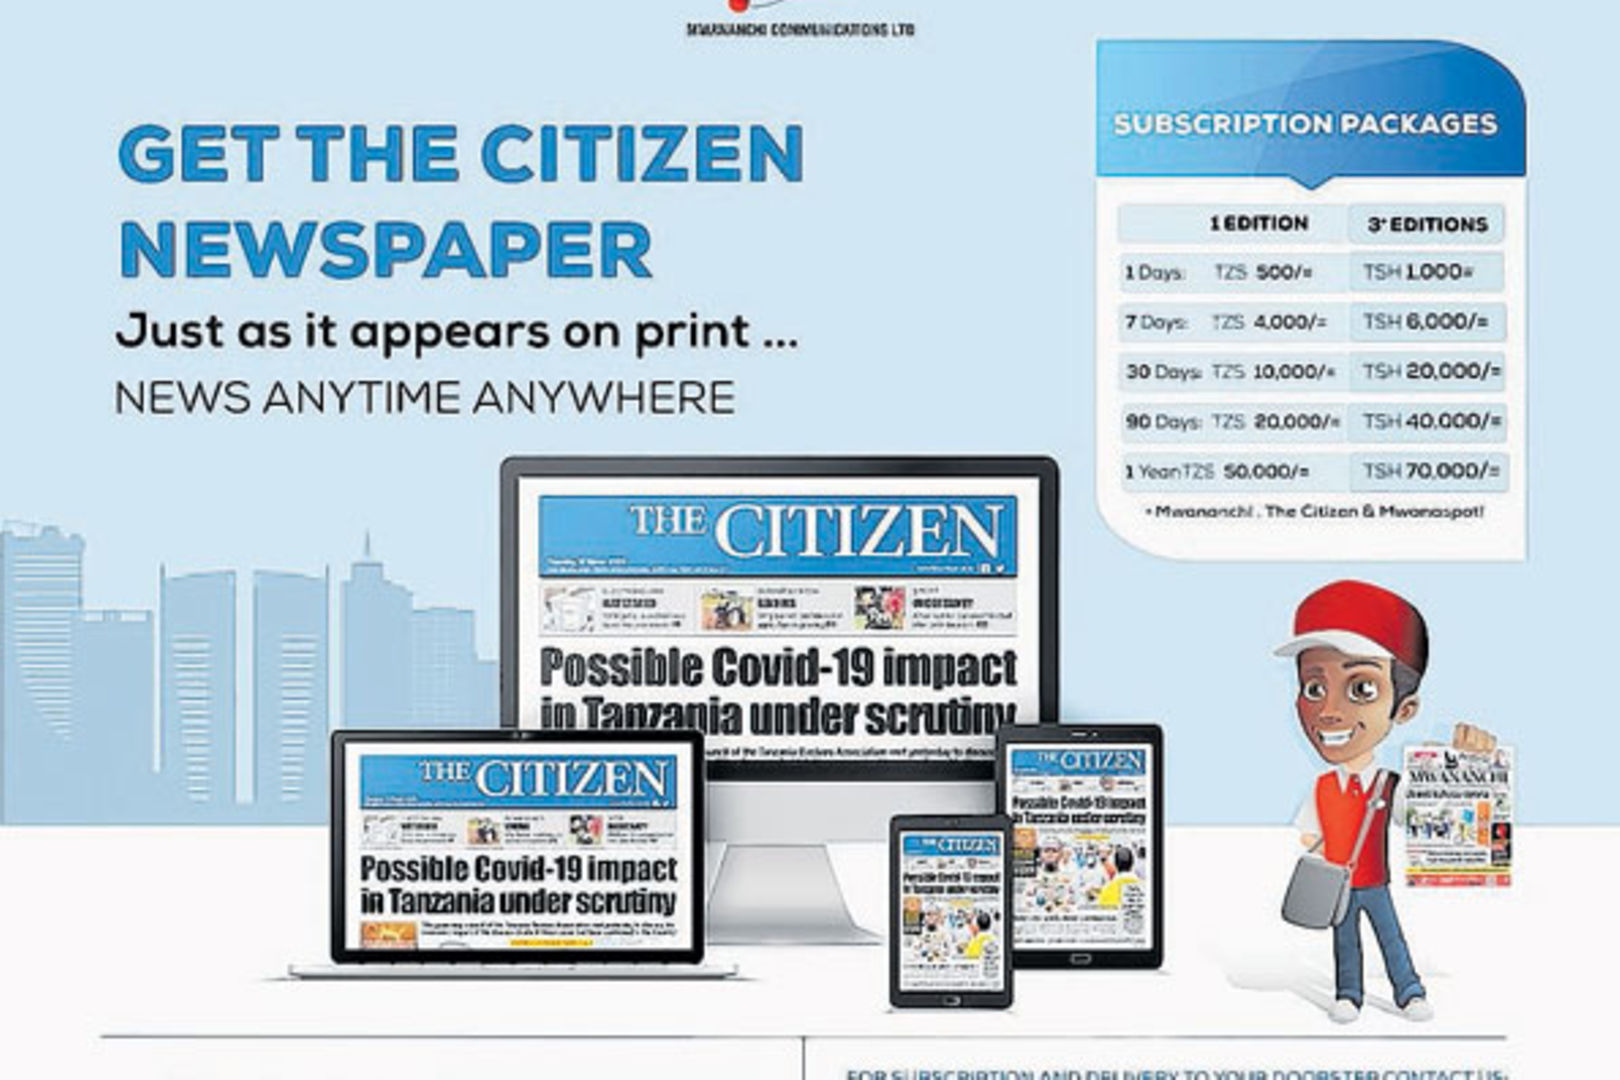 Digital delivery for 'The Citizen' weekend papers | The Citizen